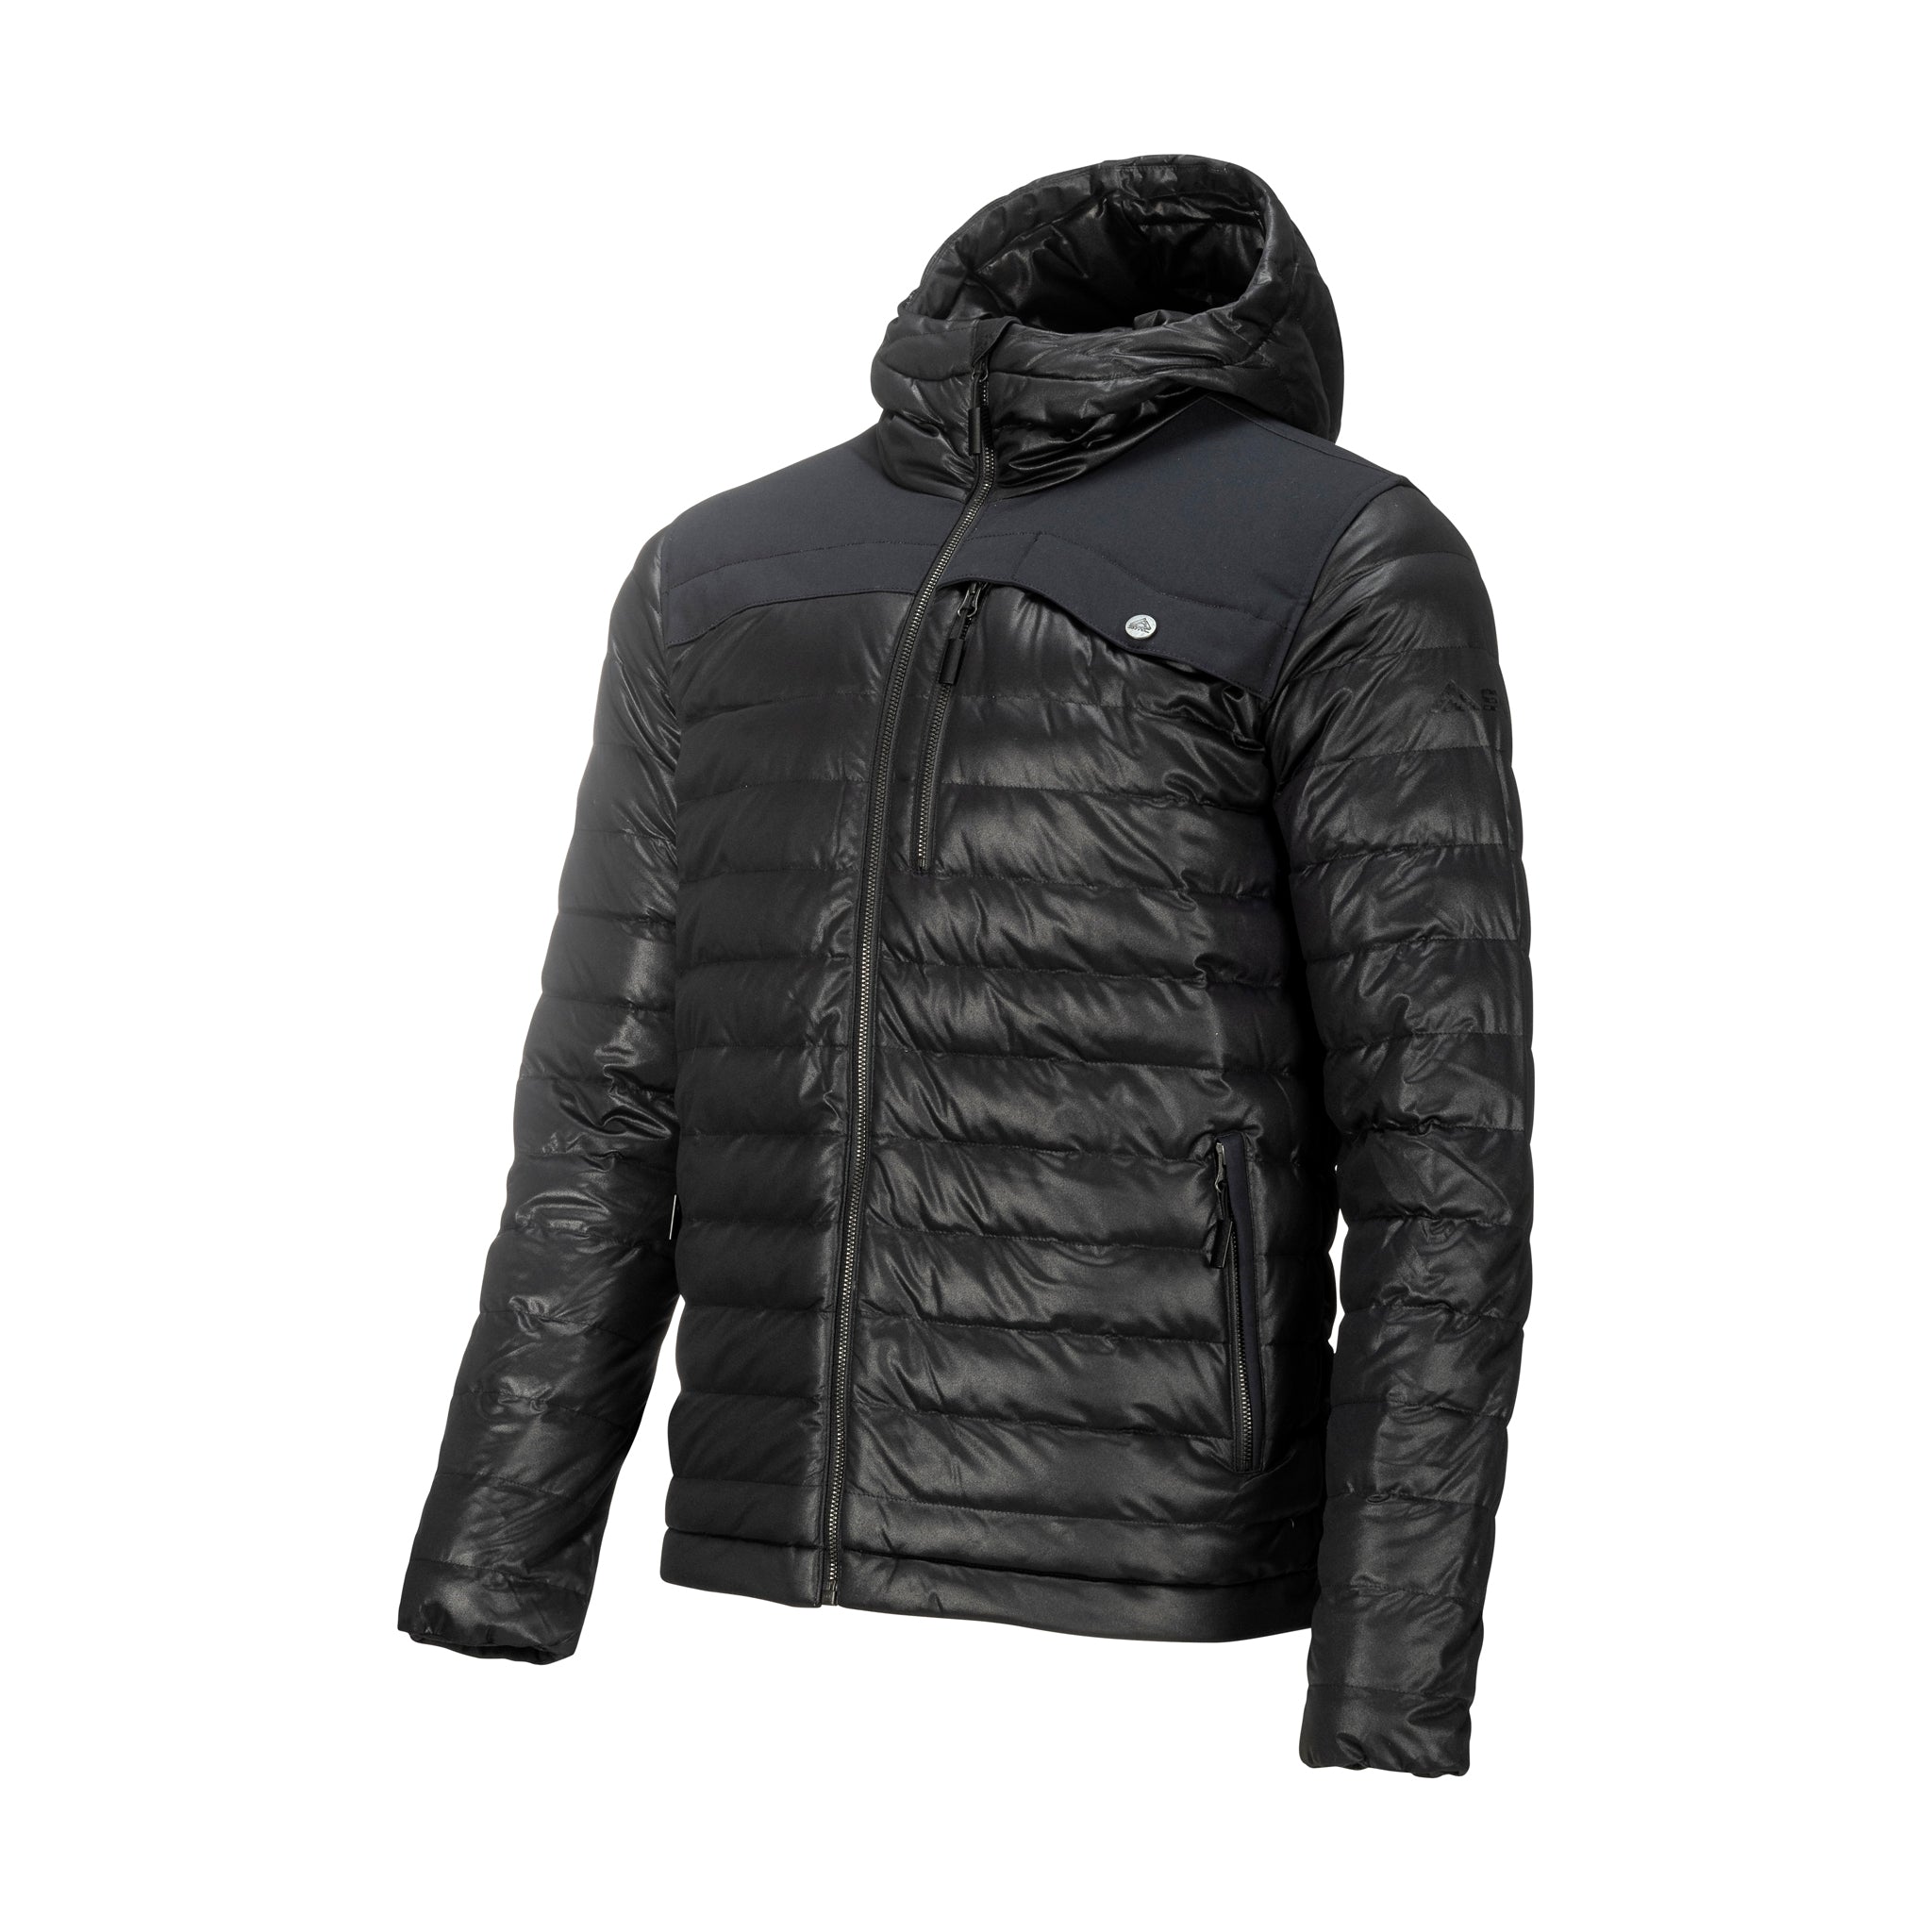 Men's Stretch Puffy Jacket | Insulated Puffy Jacket | SYNC Performance ...